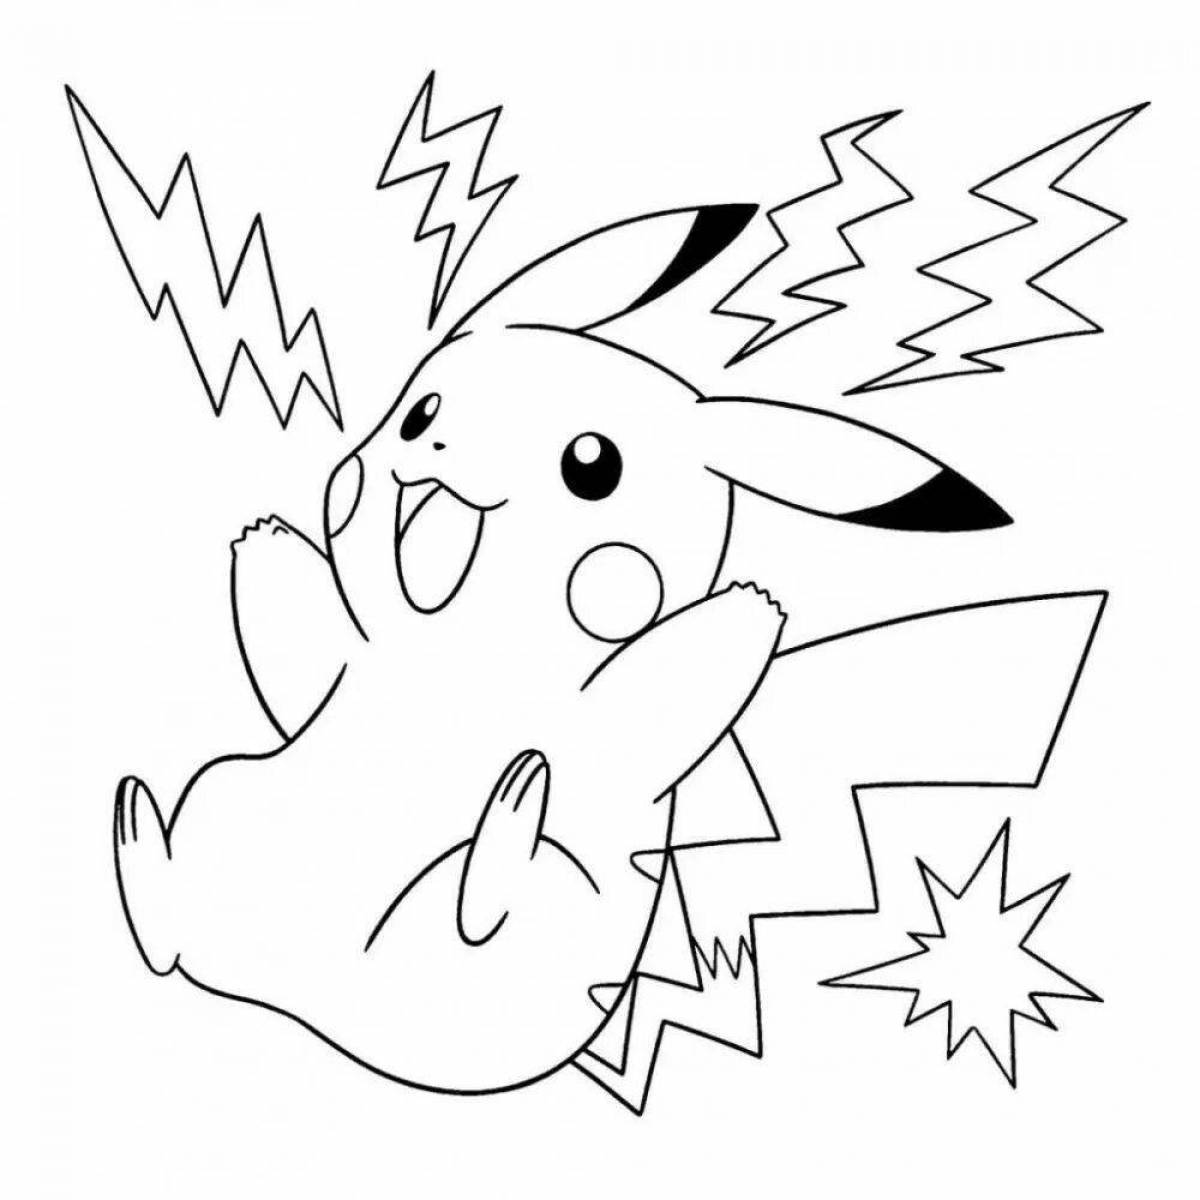 Attractive good quality pokemon coloring page